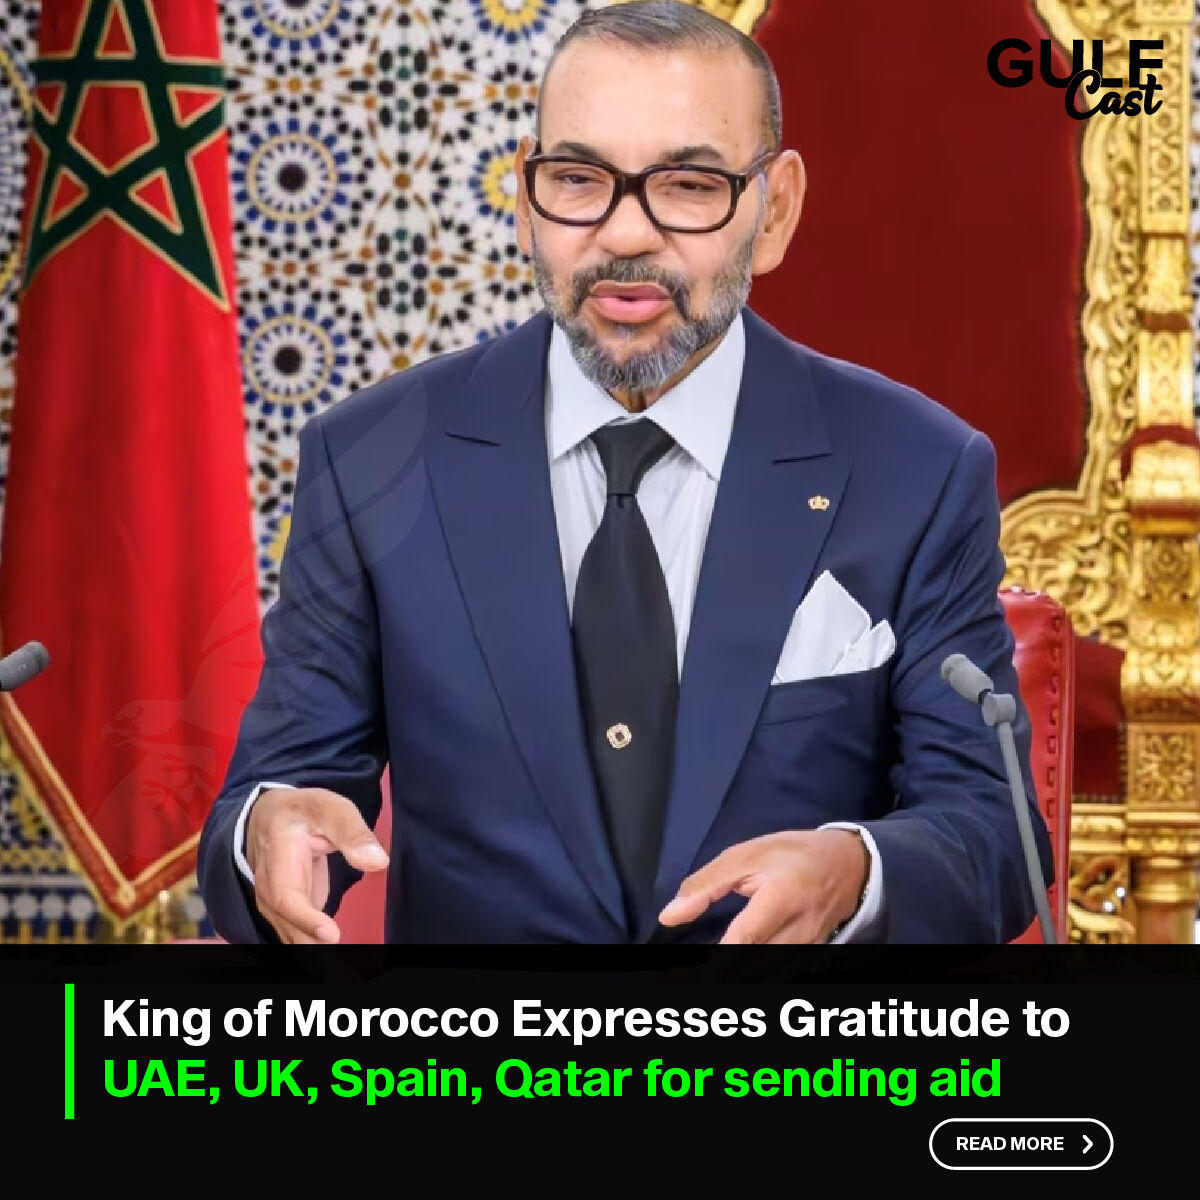 King Mohammed VI of Morocco extends his heartfelt thanks to the UAE, Spain, Qatar & UK for their unwavering support following the recent devastating earthquake.

#MoroccoEarthquake #ThankYouUAE #ThankYouSpain #ThankYouQatar #ThankYouUK #aid #humanityfirst #gulfcast #fy #news